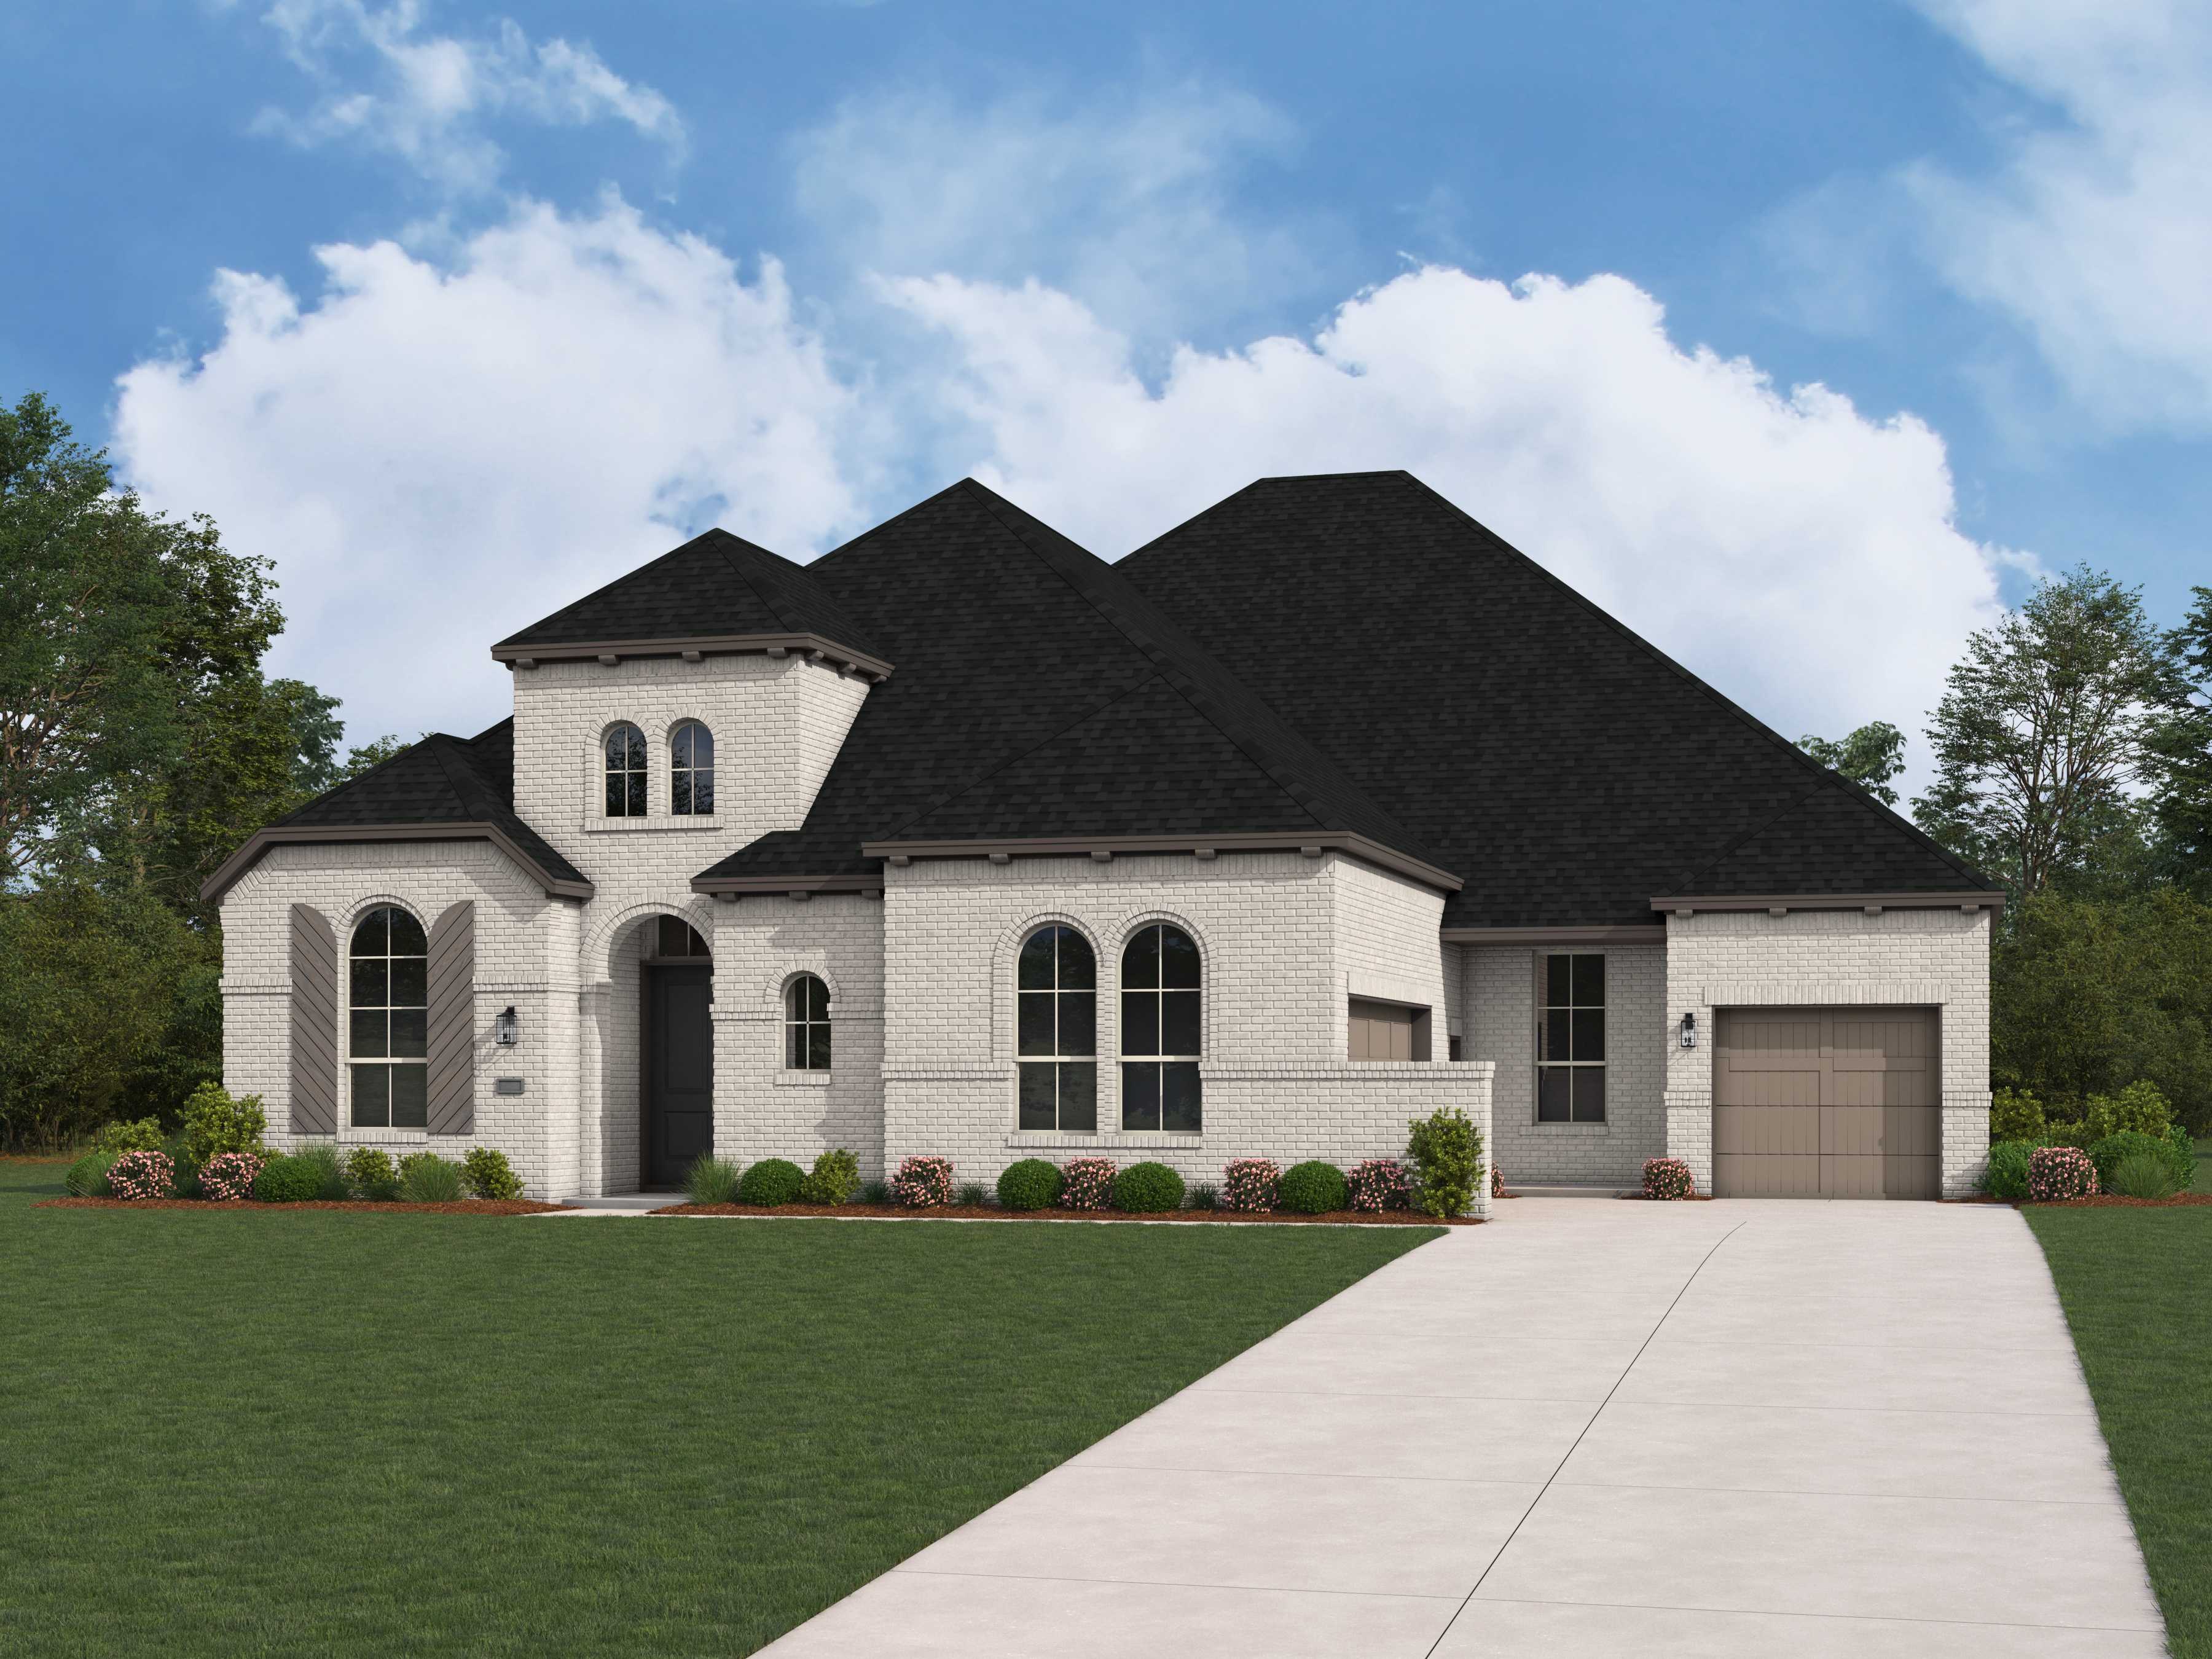 New Homes in Cane Island: 80ft. lots - Home Builder in Katy TX